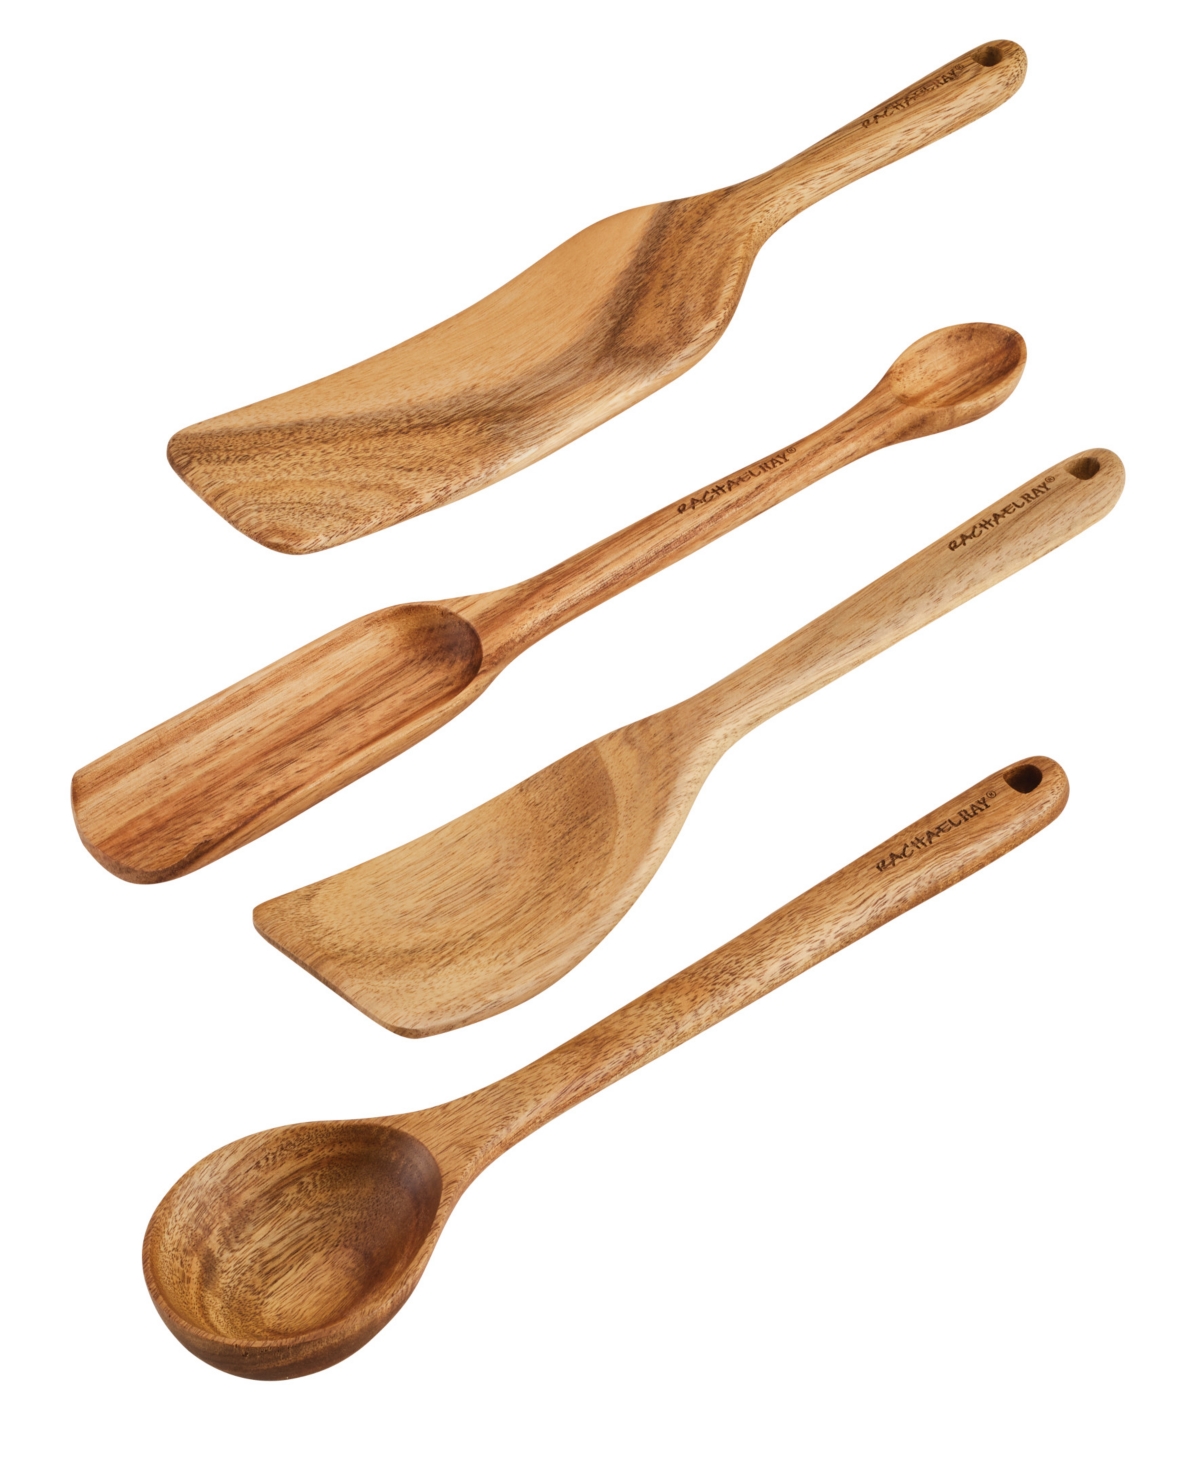 Rachael Ray Tools And Gadgets Wooden Kitchen Utensils, Set Of 4 In Acacia Wood